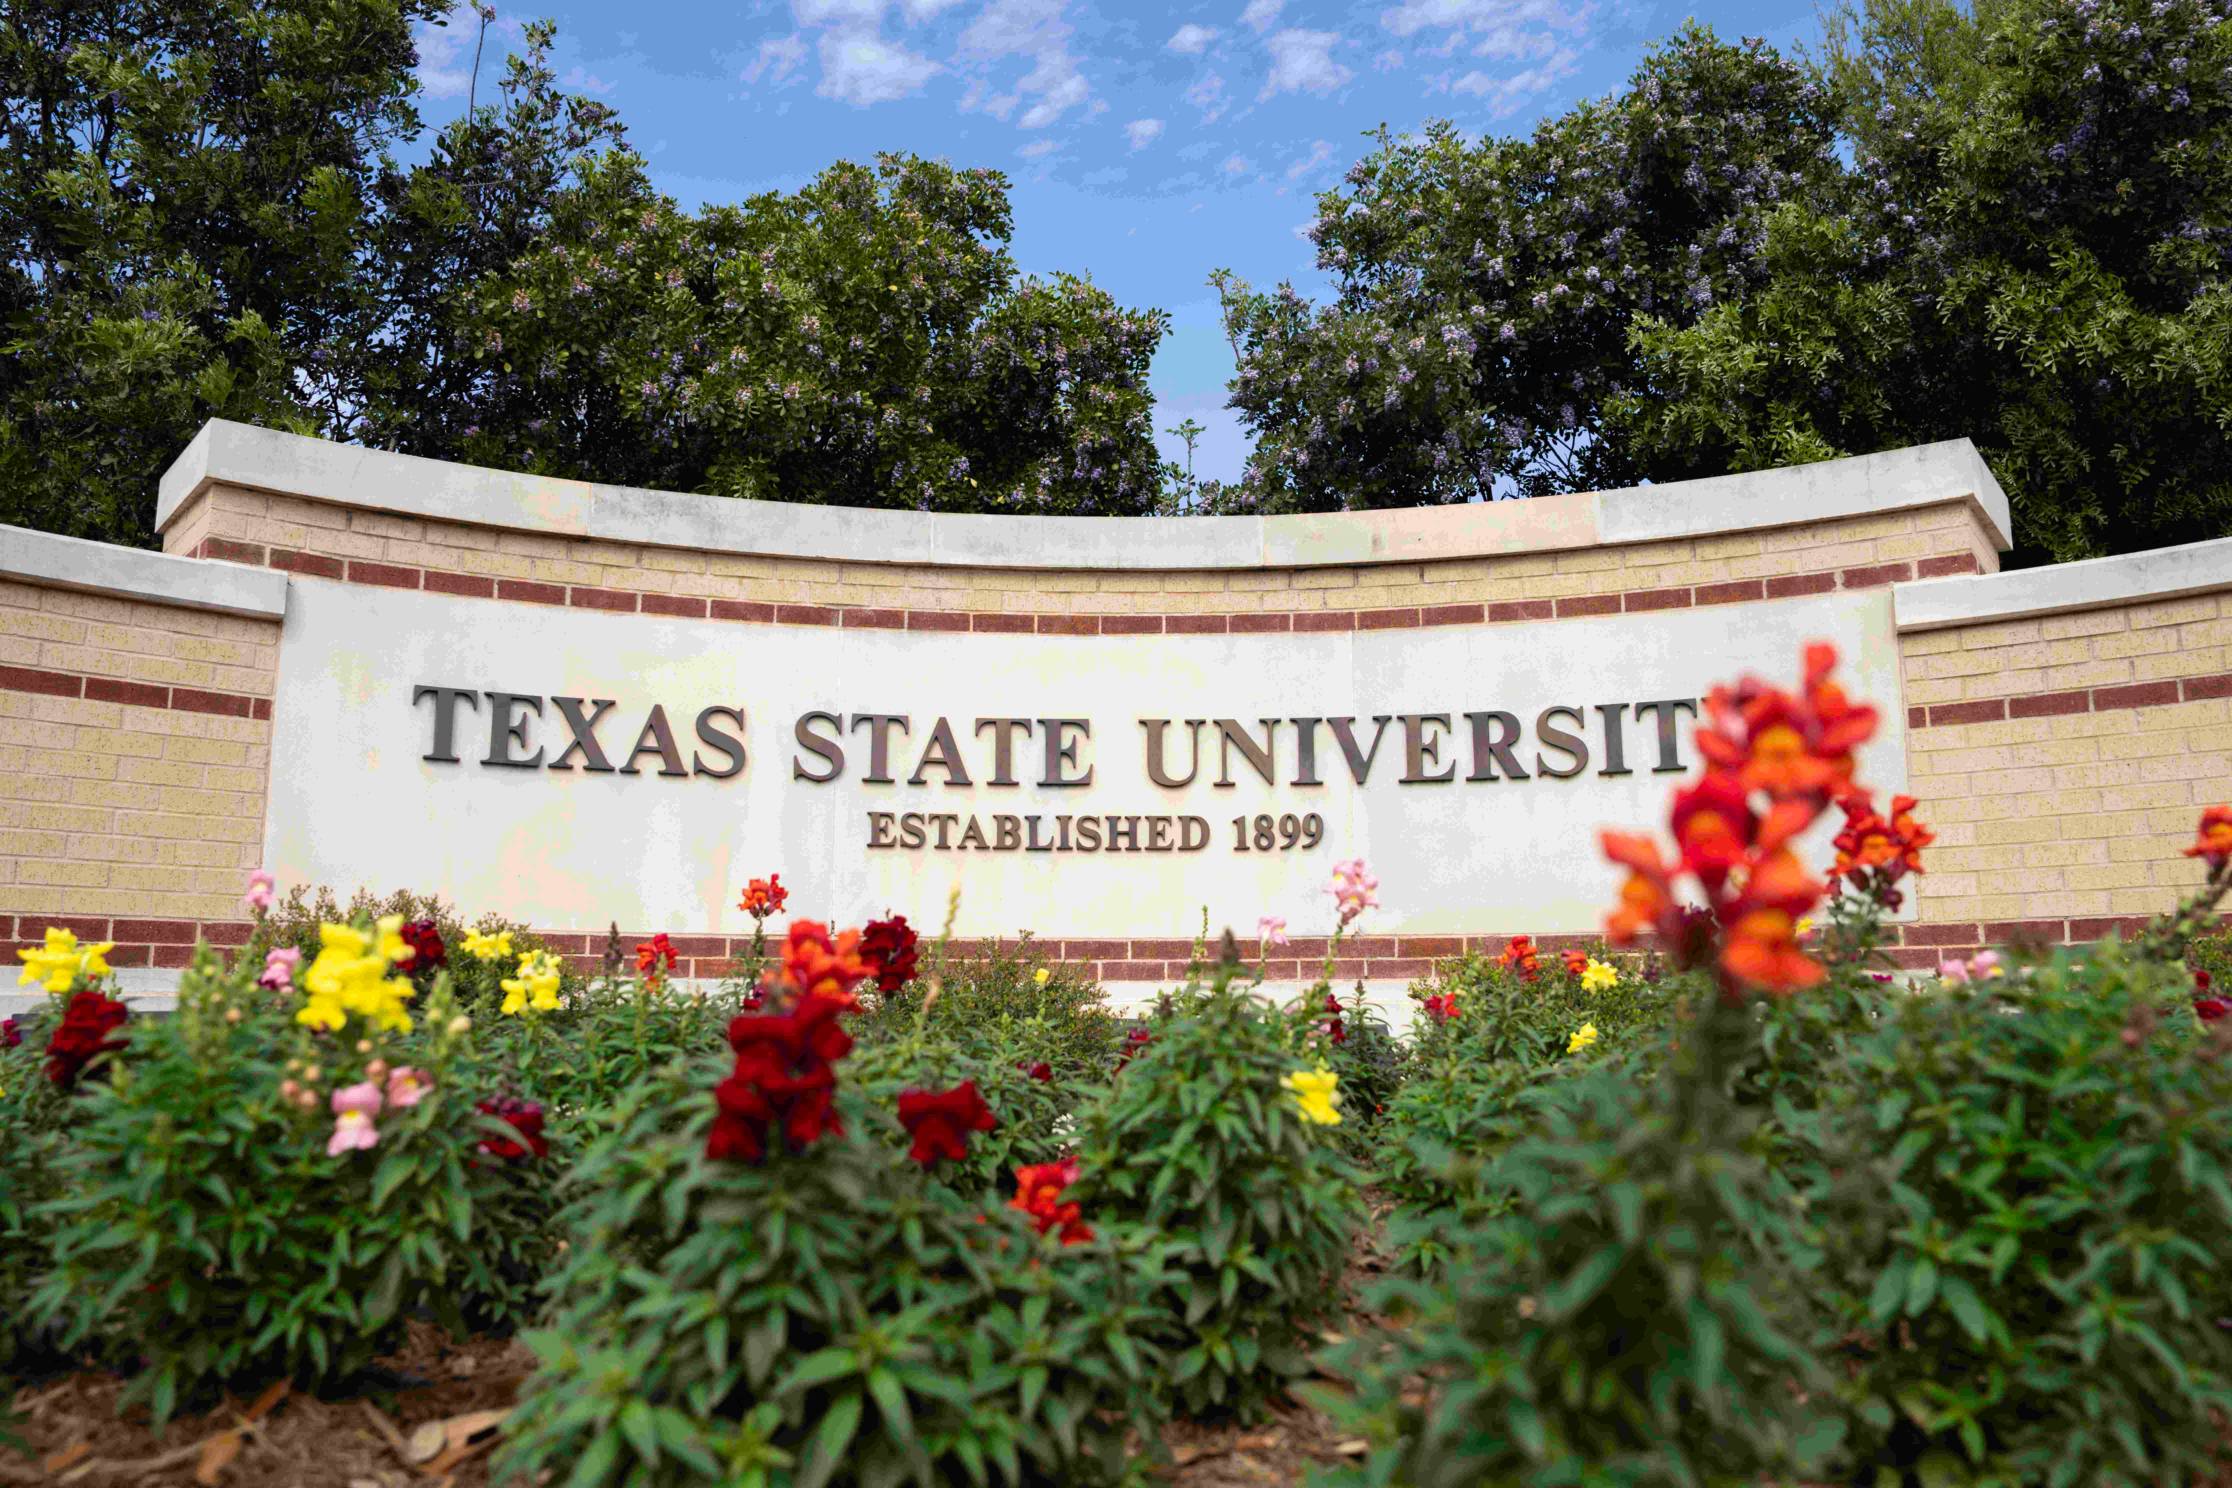 University sign with snapdragon flowers